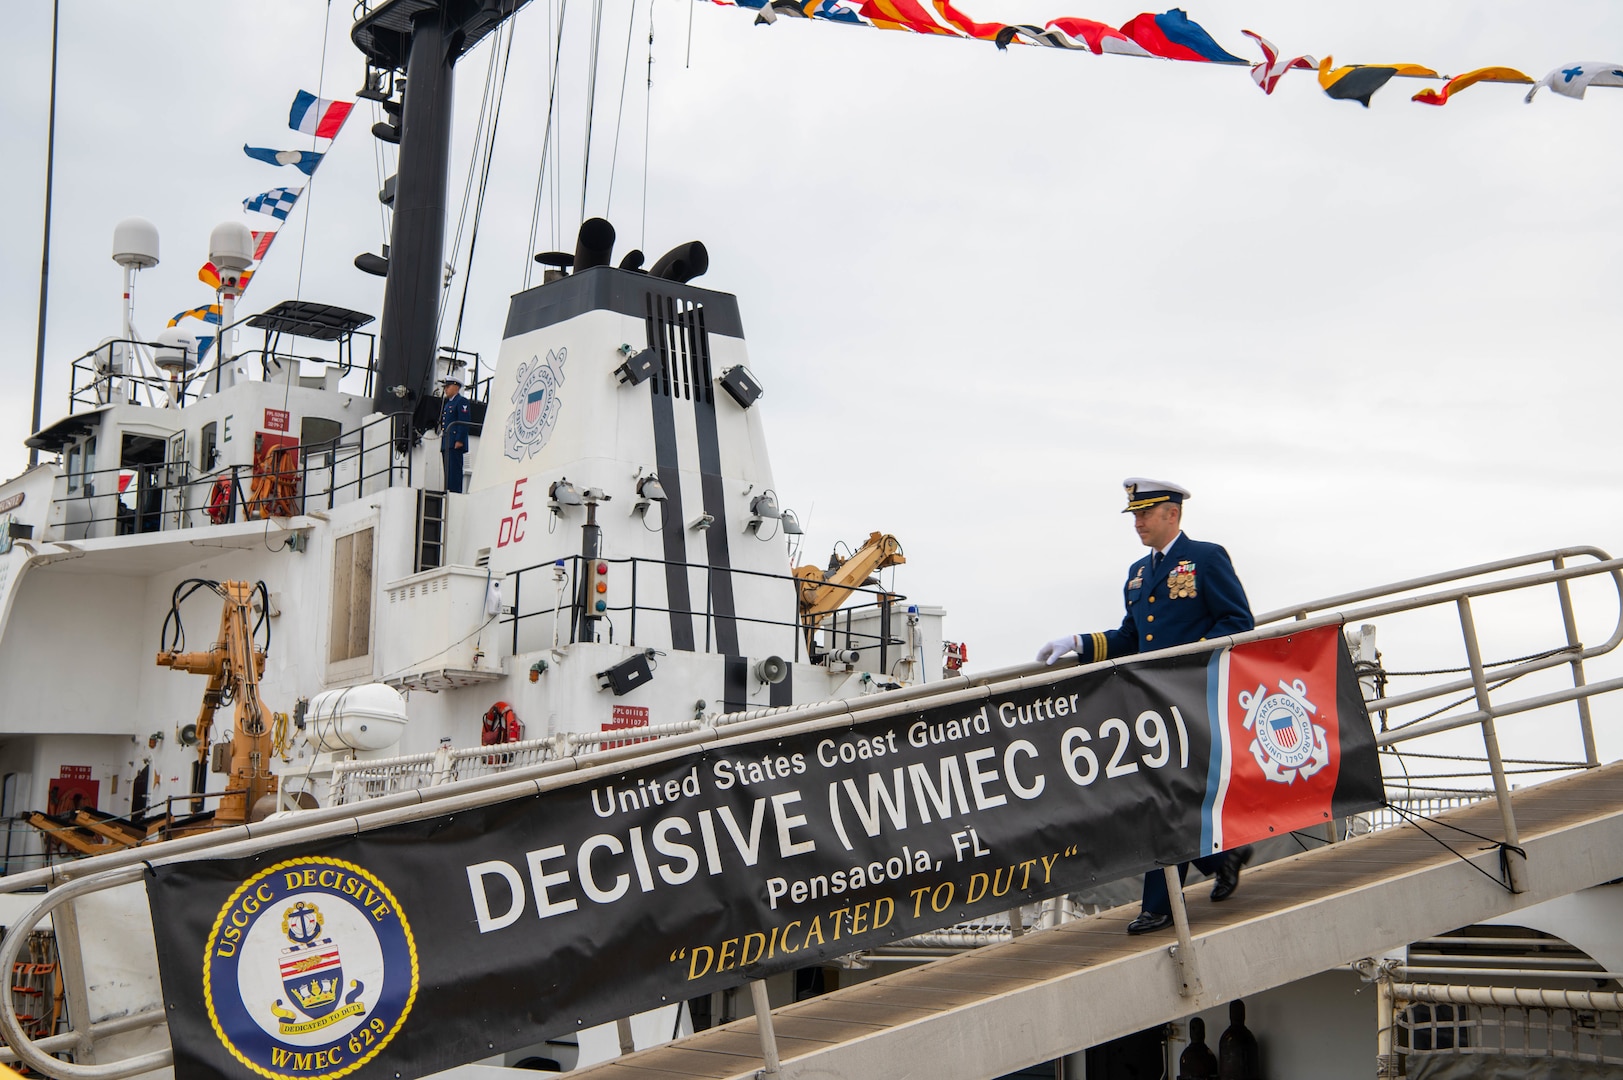 Cmdr. Aaron W. Delano-Johnson, commanding officer of Coast Guard Cutter Decisive, disembarks Decisive during its decommissioning ceremony at Pensacola, Florida, March 2, 2023. The decommissioning ceremony marked the retirement of Decisive as a unit of the operating forces of the U.S. Coast Guard. (U.S. Coast Guard photo by Petty Officer 2nd Class Jose Hernandez)